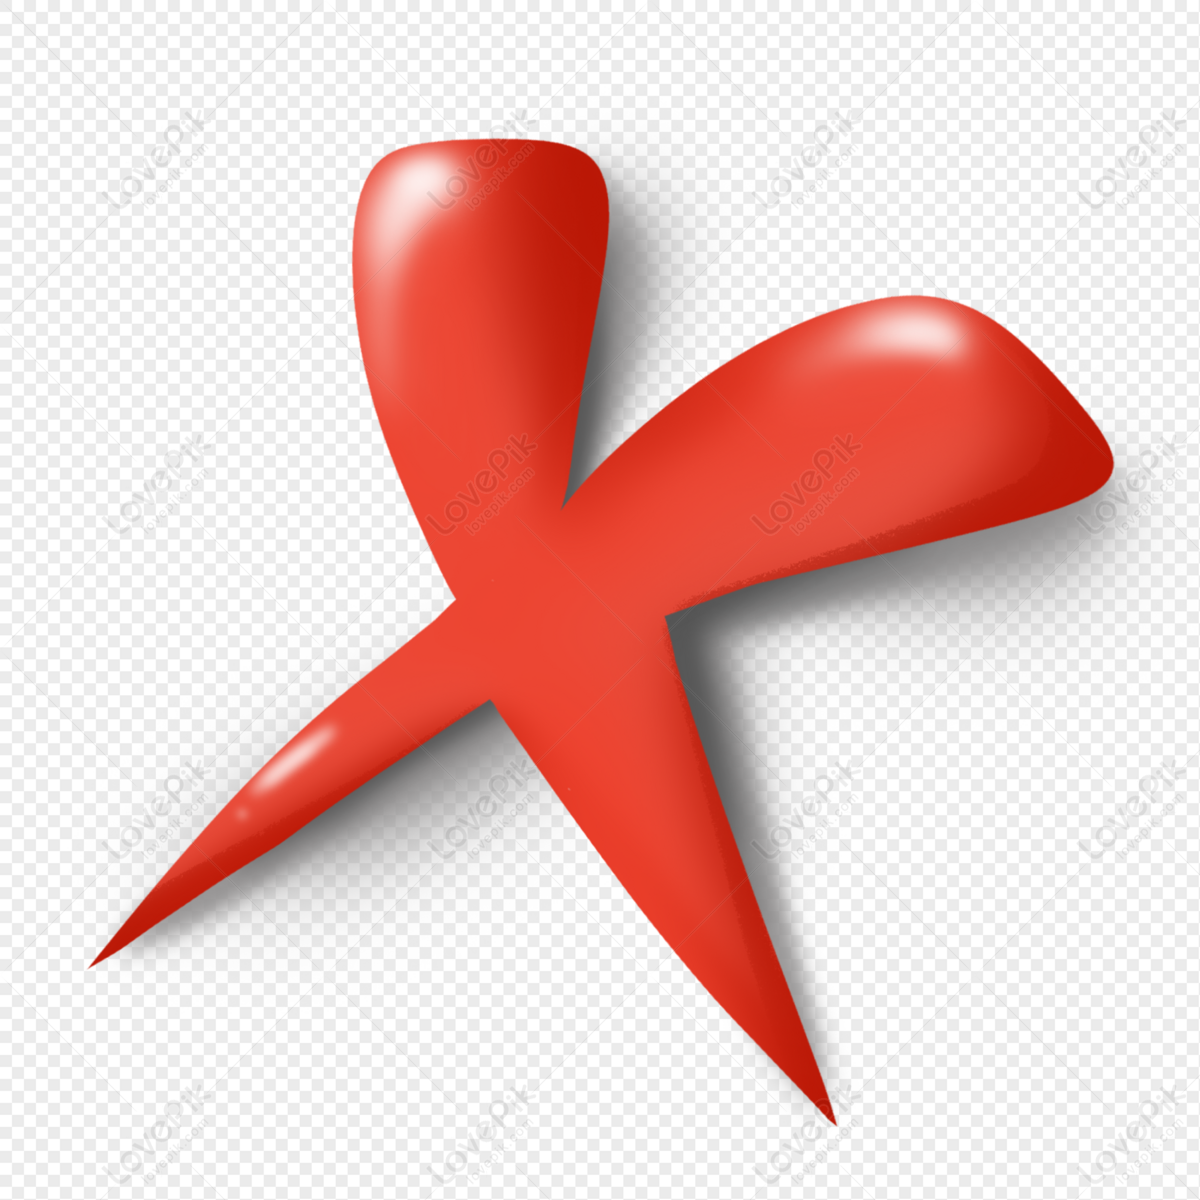 Red x art, X mark , Red Cross Mark transparent background PNG clipart